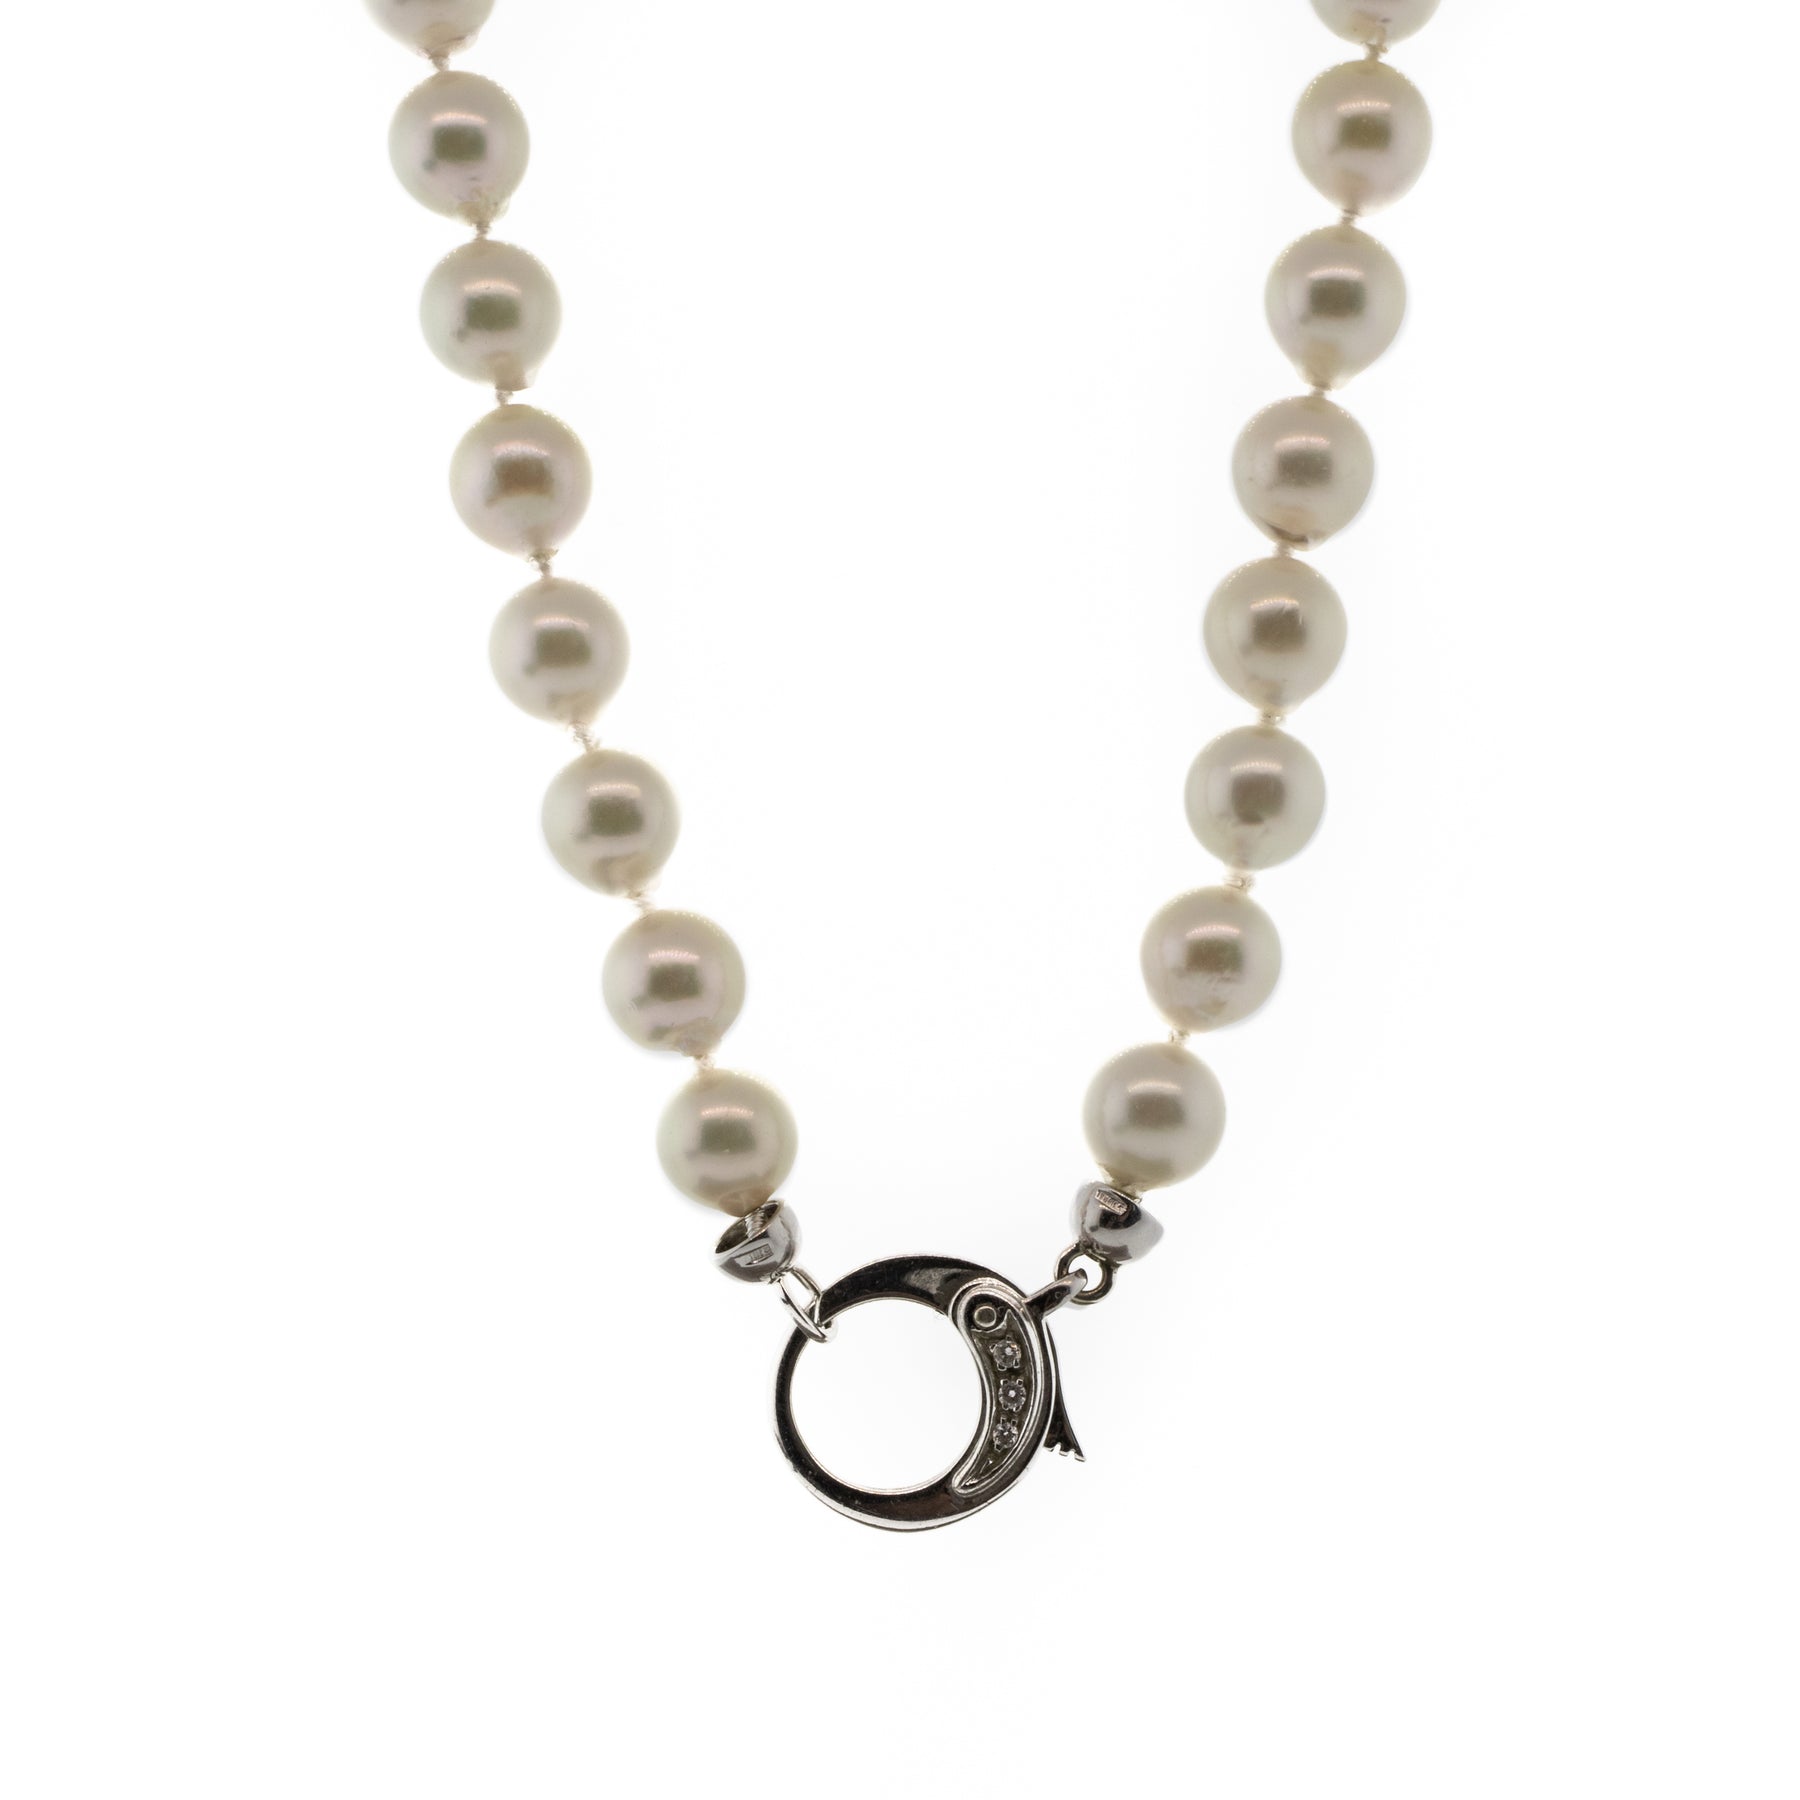 Akoya Pearl Necklace With White Gold & Diamond Clasp